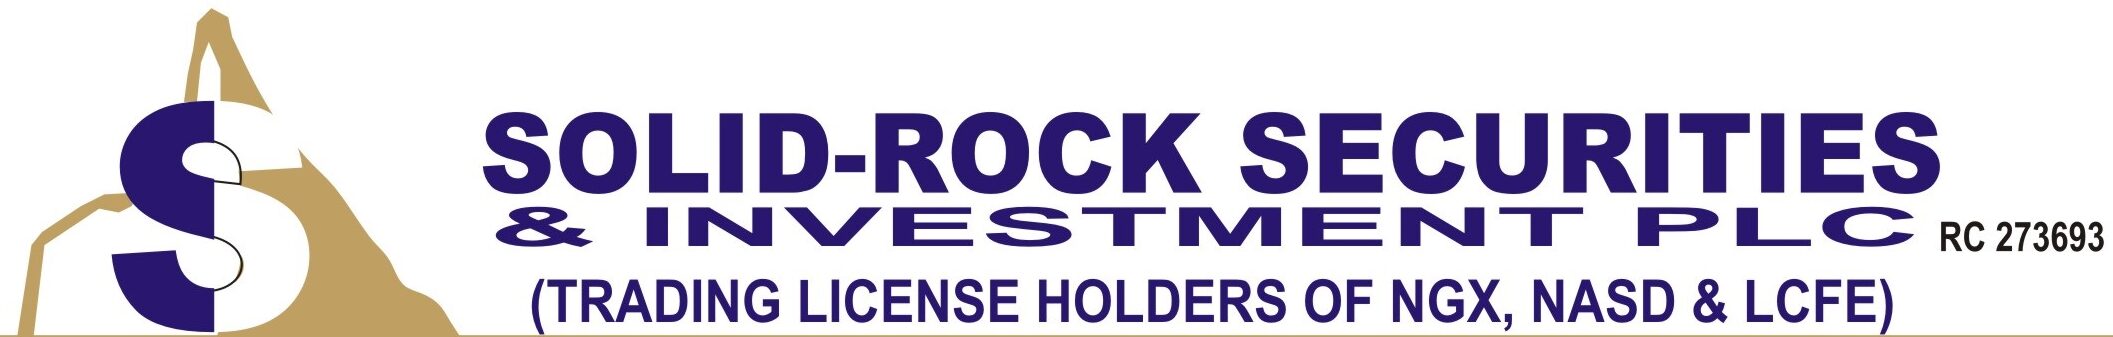 Solid-Rock Securities & Investment PLC